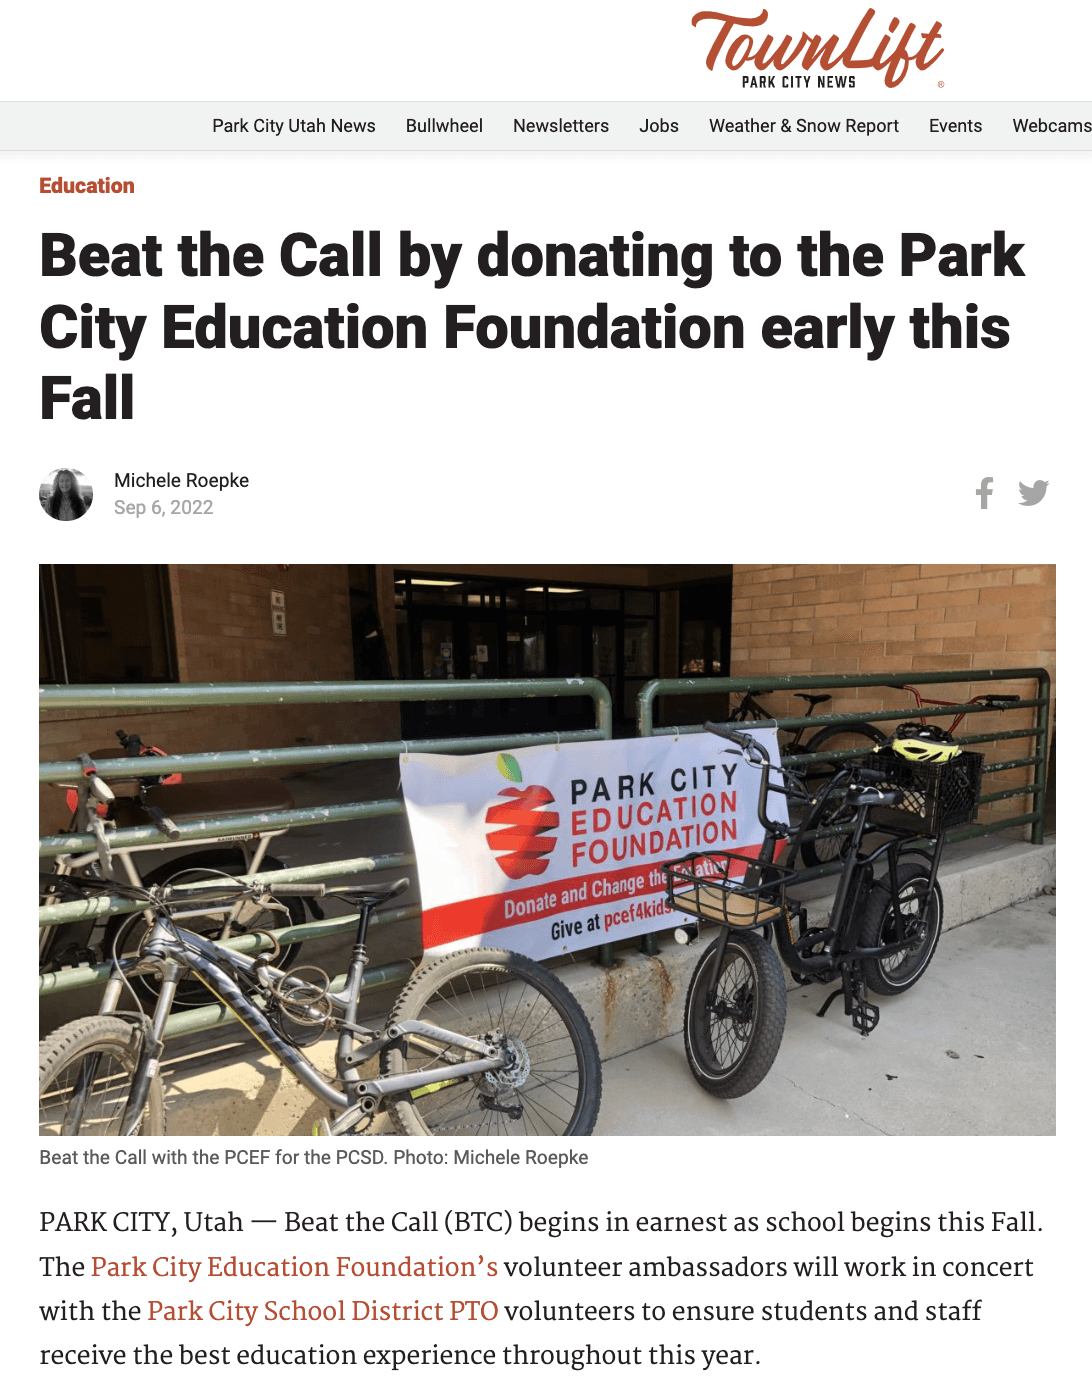 Beat the Call by Donating to the Park City Education Foundation Early This Fall